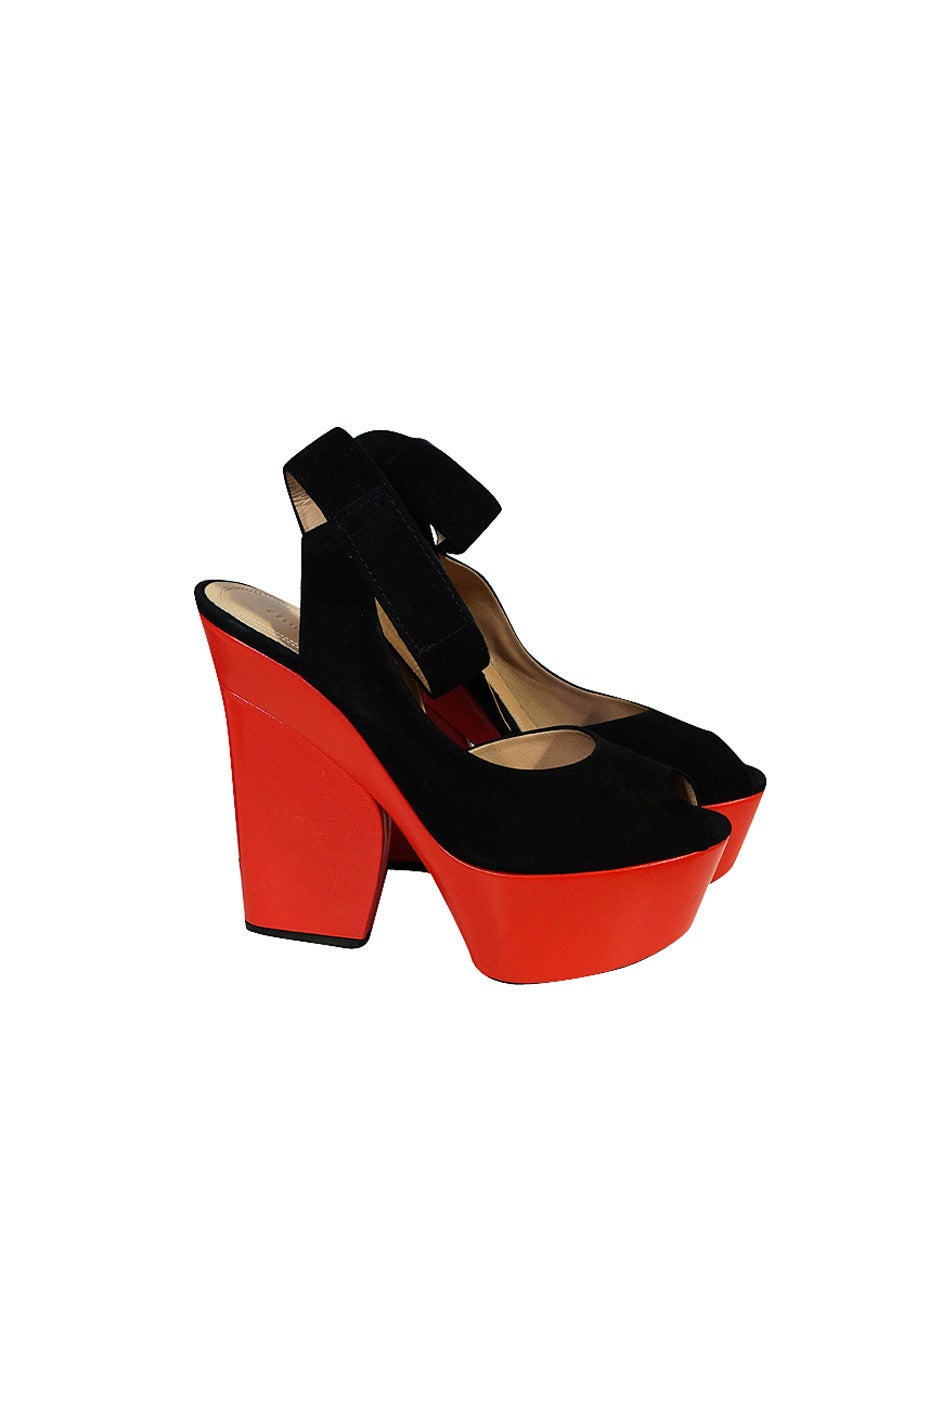 The ‘it’ shoe just last year, these gorgeous black and red color block ankle wrap platform pumps are still one of the best shoes ever made and cult classic. They were featured in the ad campaign that year and were sold out worldwide when they were